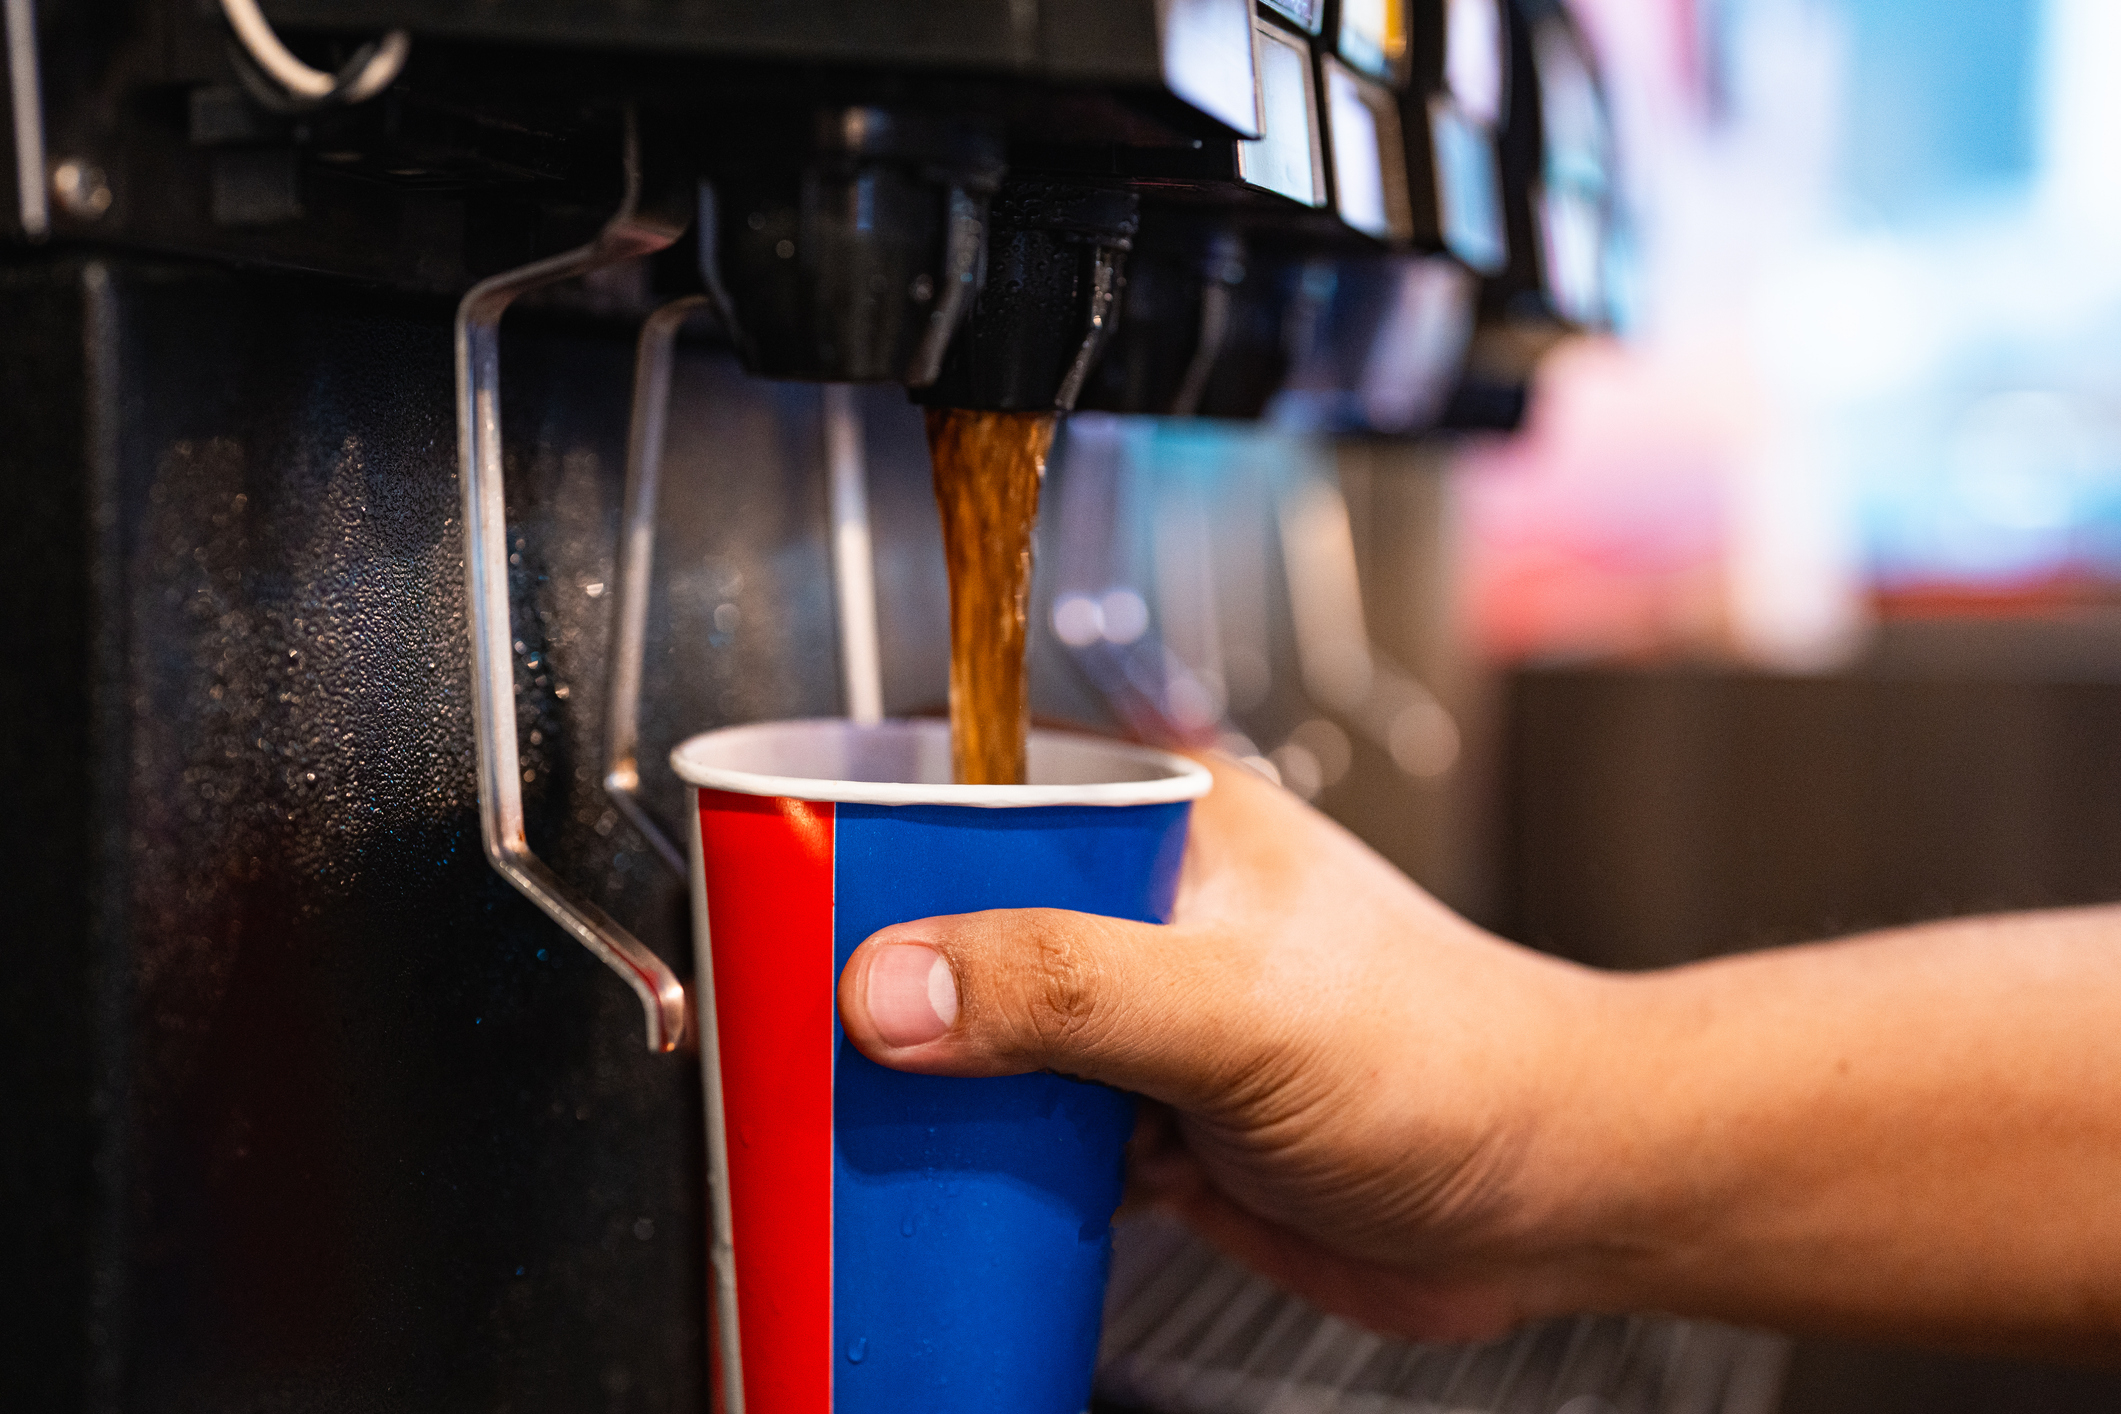 Person filling a red and blue cup with a beverage from a dispenser